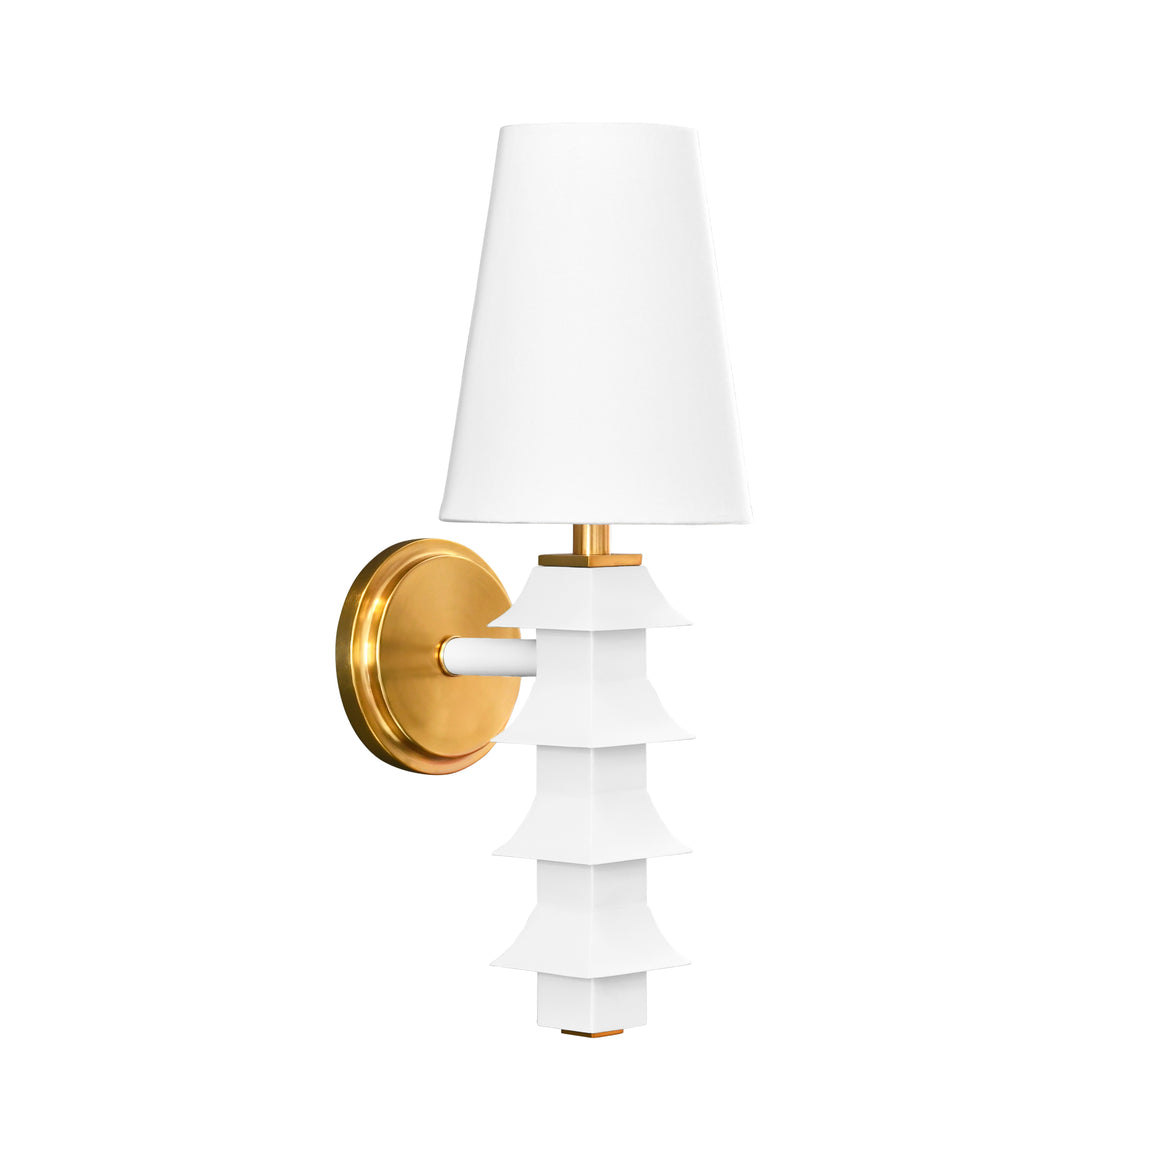 Sedona Handpainted Tole Pagoda Sconce in White